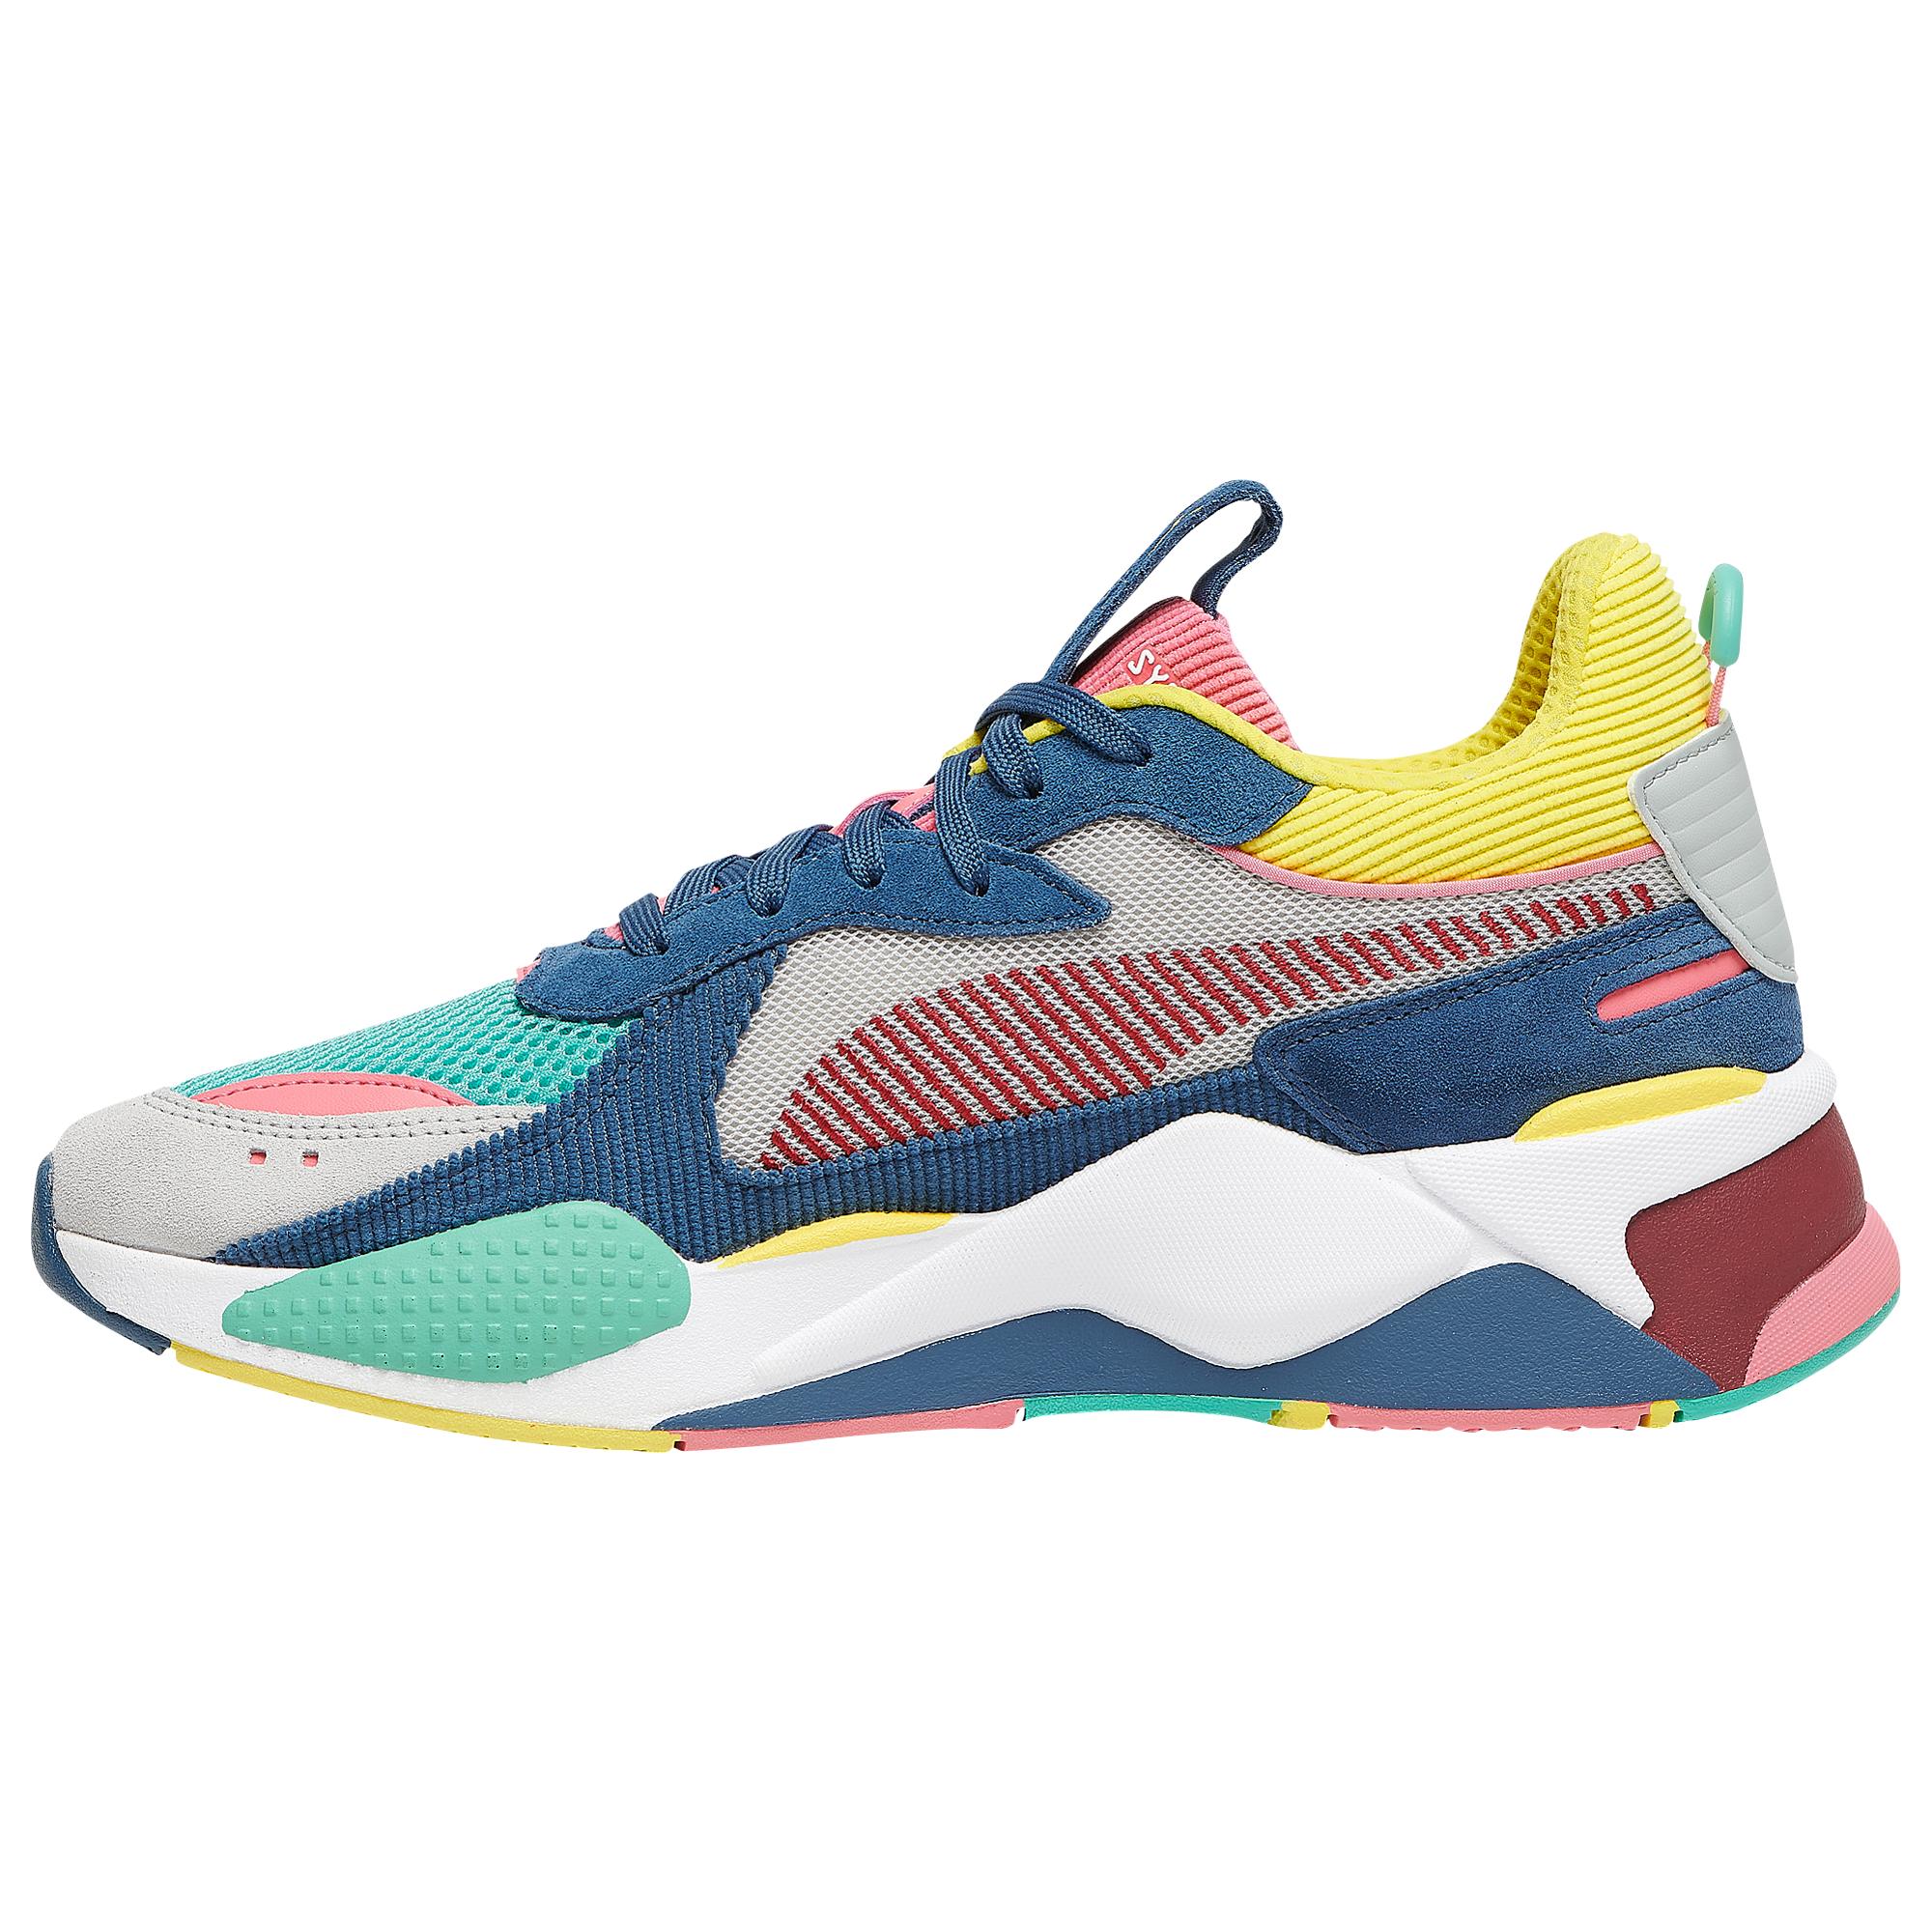 Buy > pink and blue puma shoes > in stock